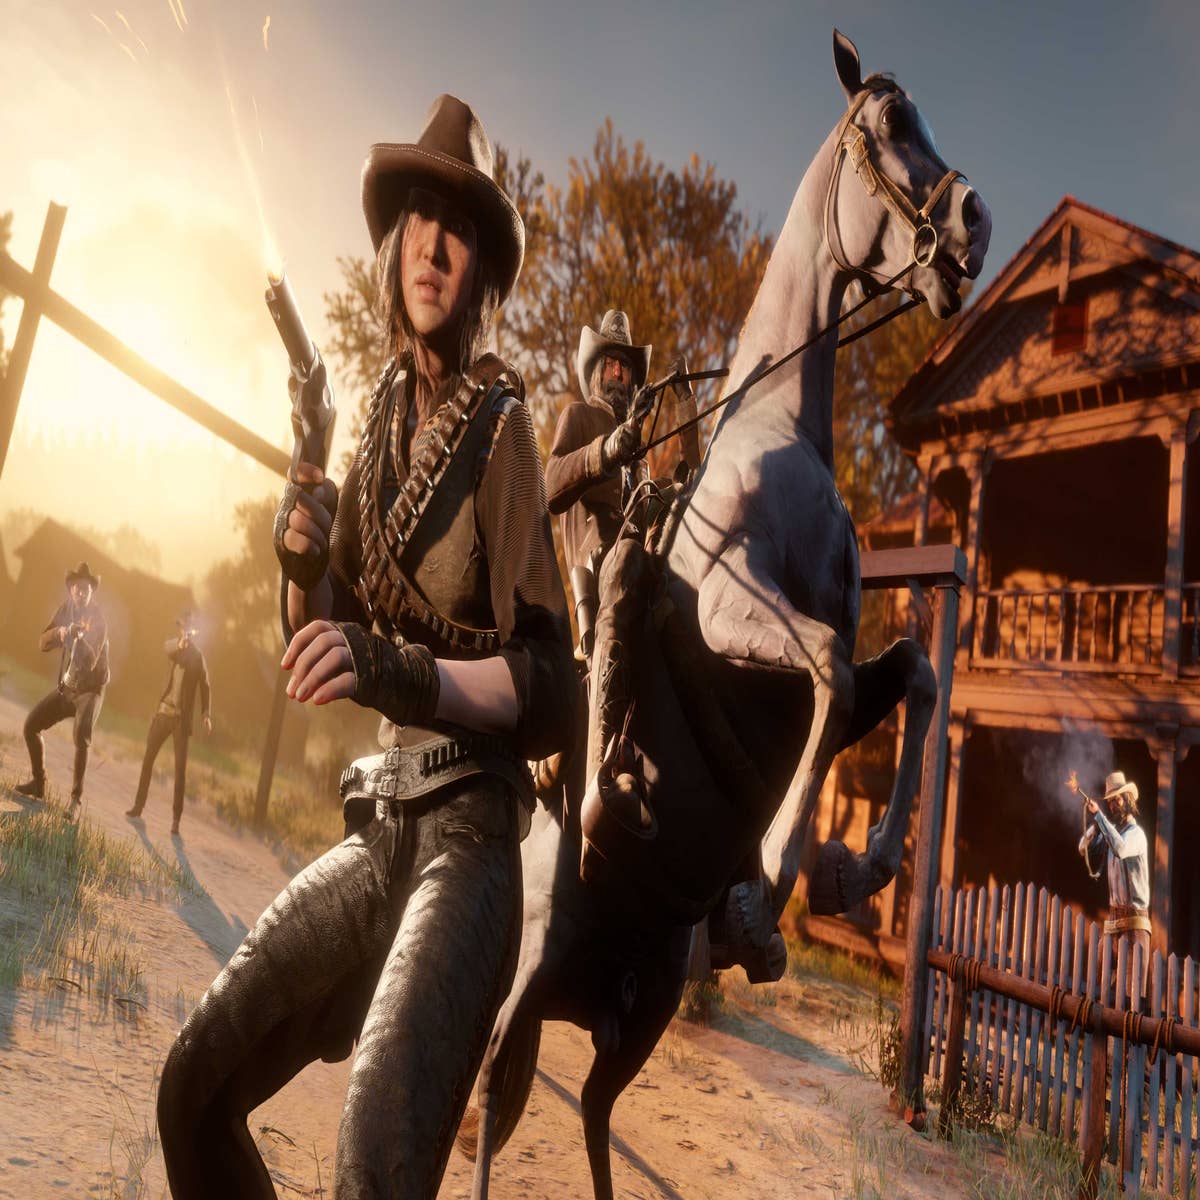 Red Dead Redemption 2 gets big improvement thanks to Xbox Series X